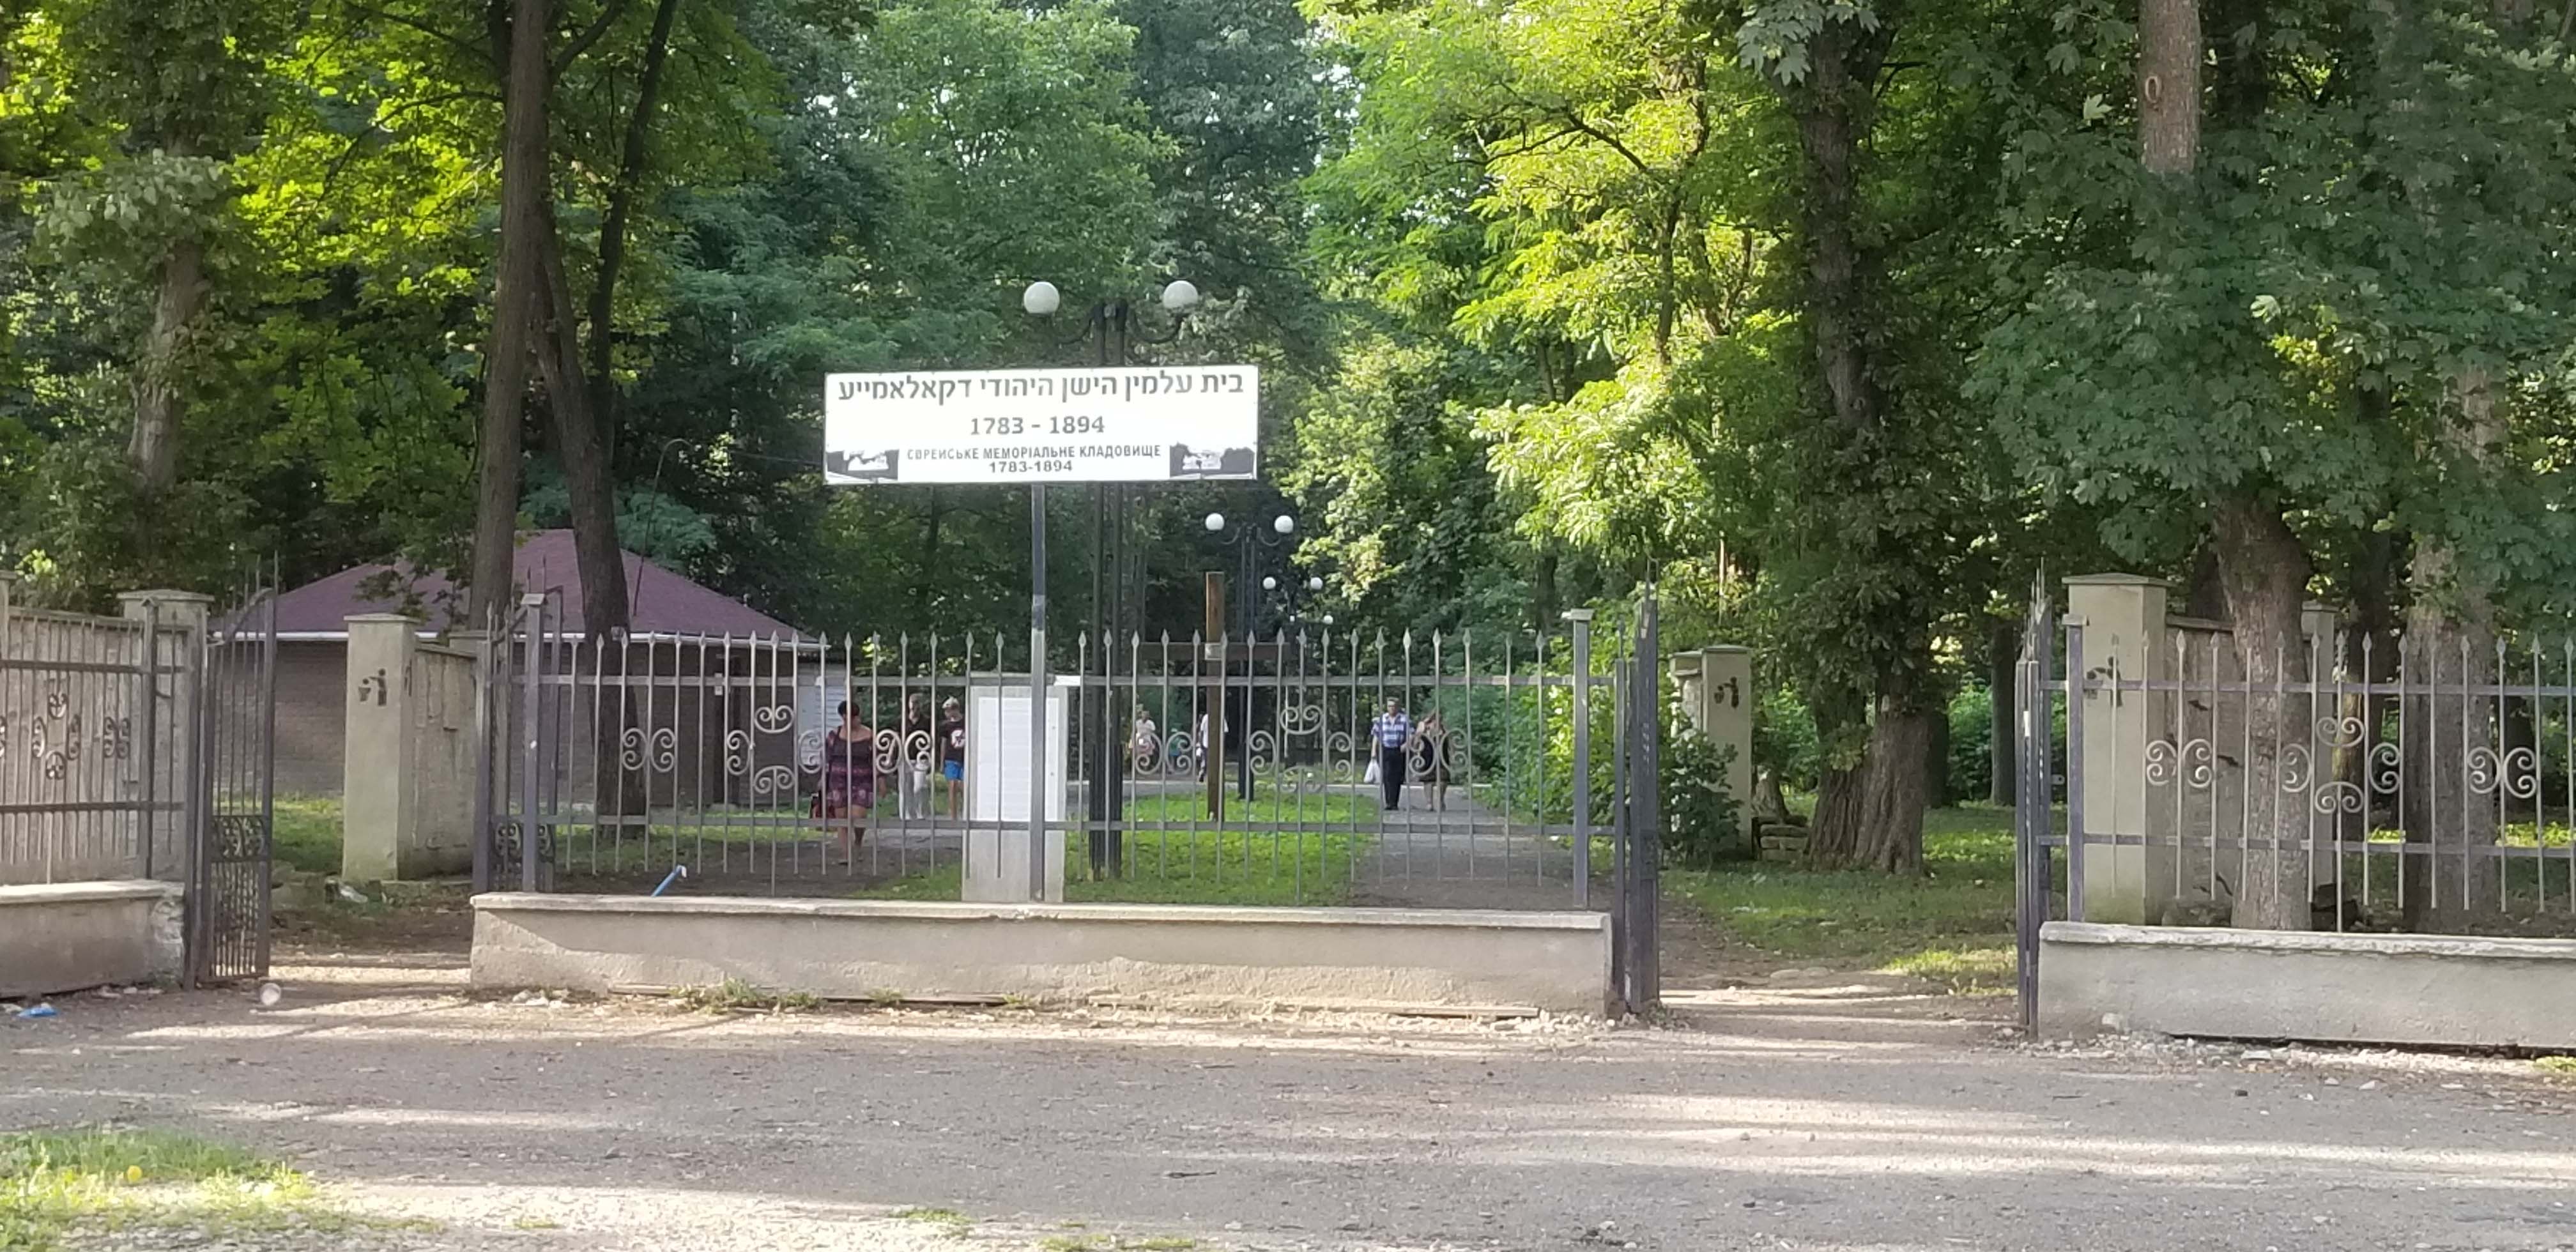 Entrance to the 2nd Jewish cemetery